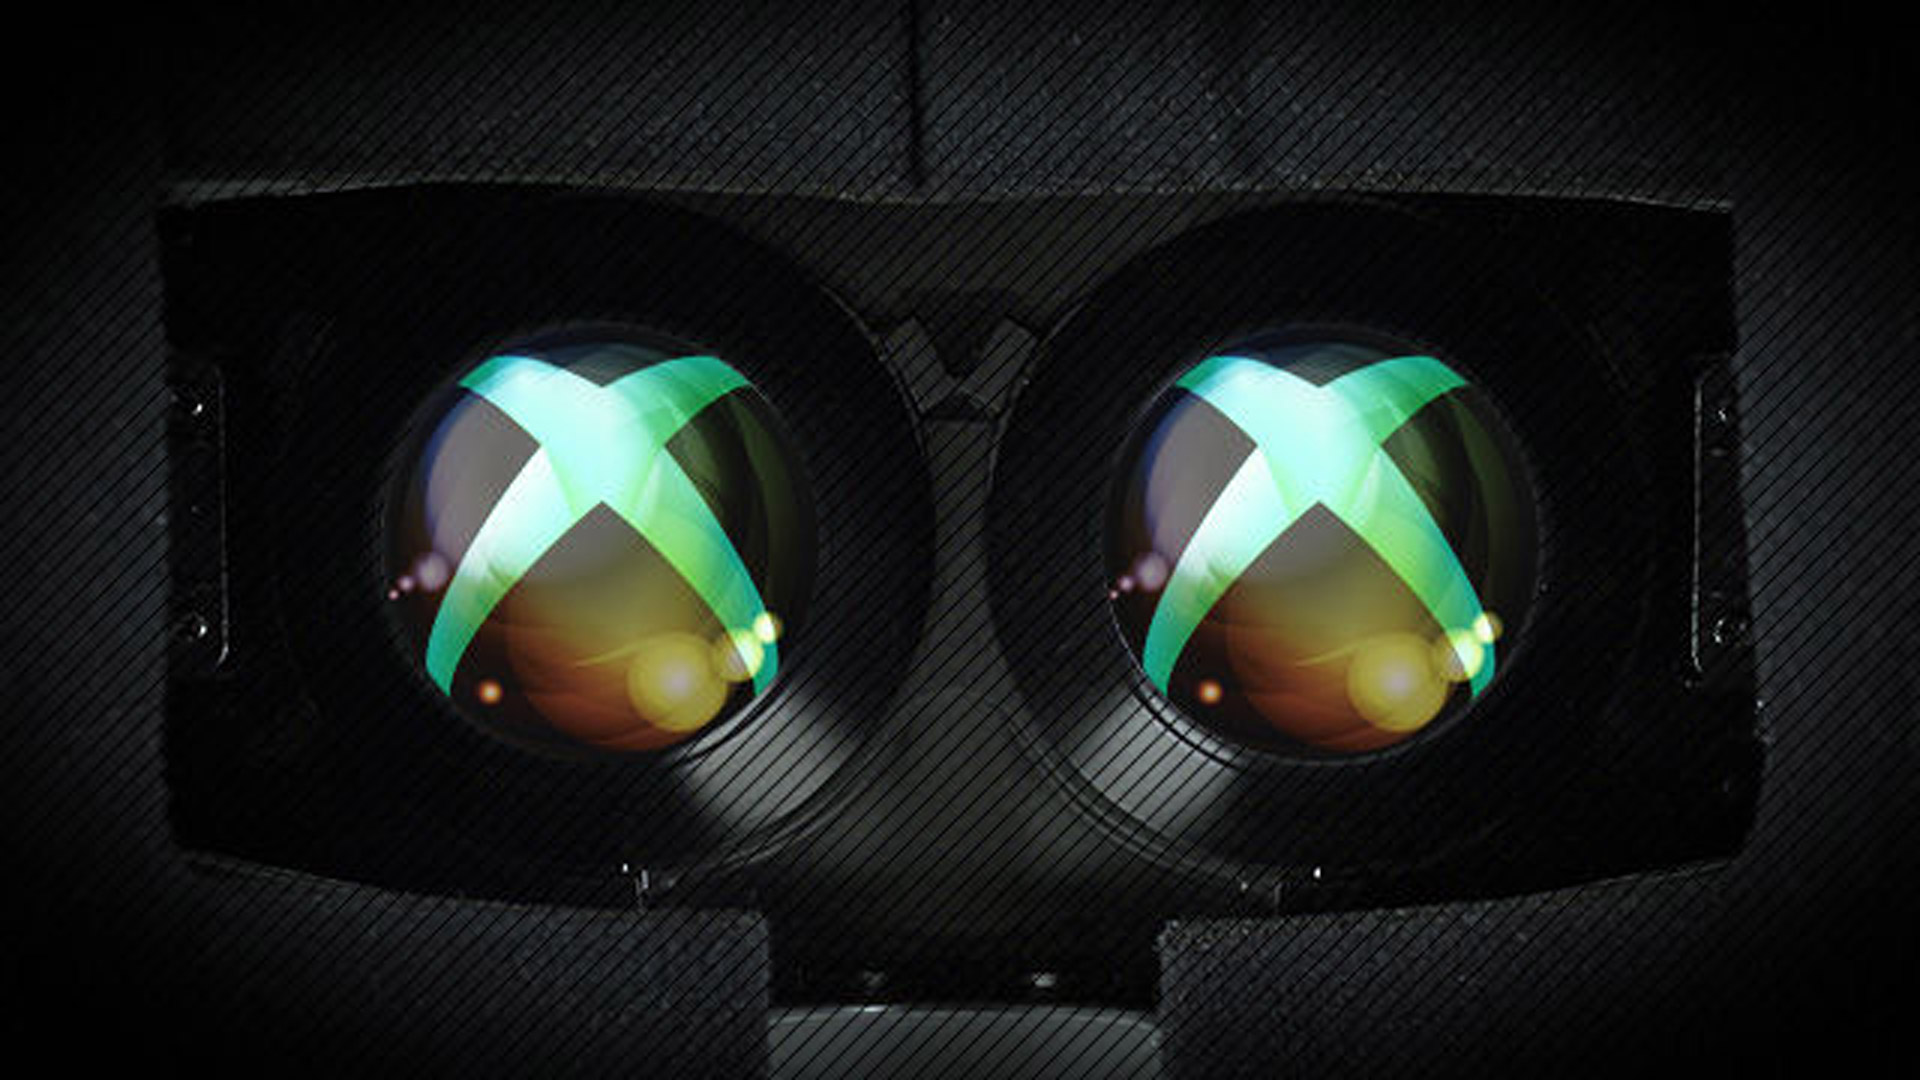 vr headset for xbox one games